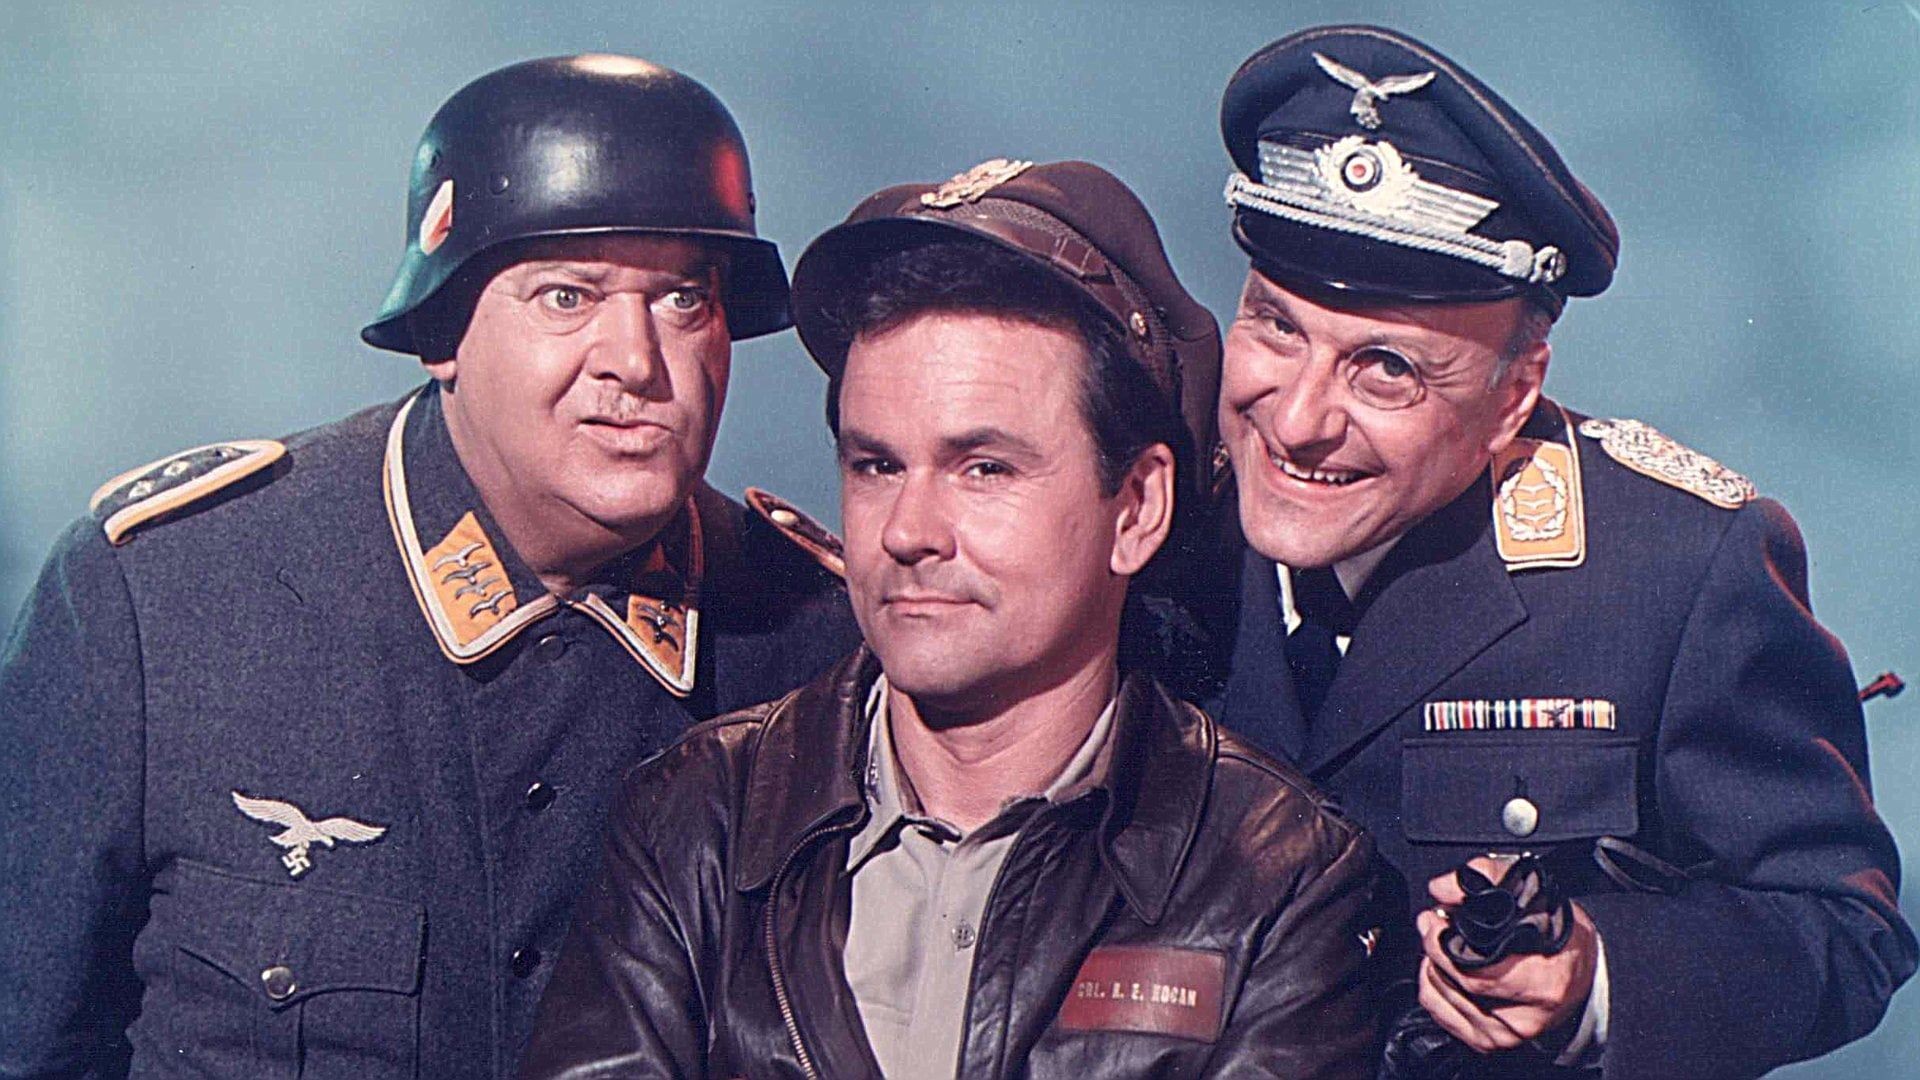 Hogan's Heroes - Top Hat, White Tie and Bomb Sights